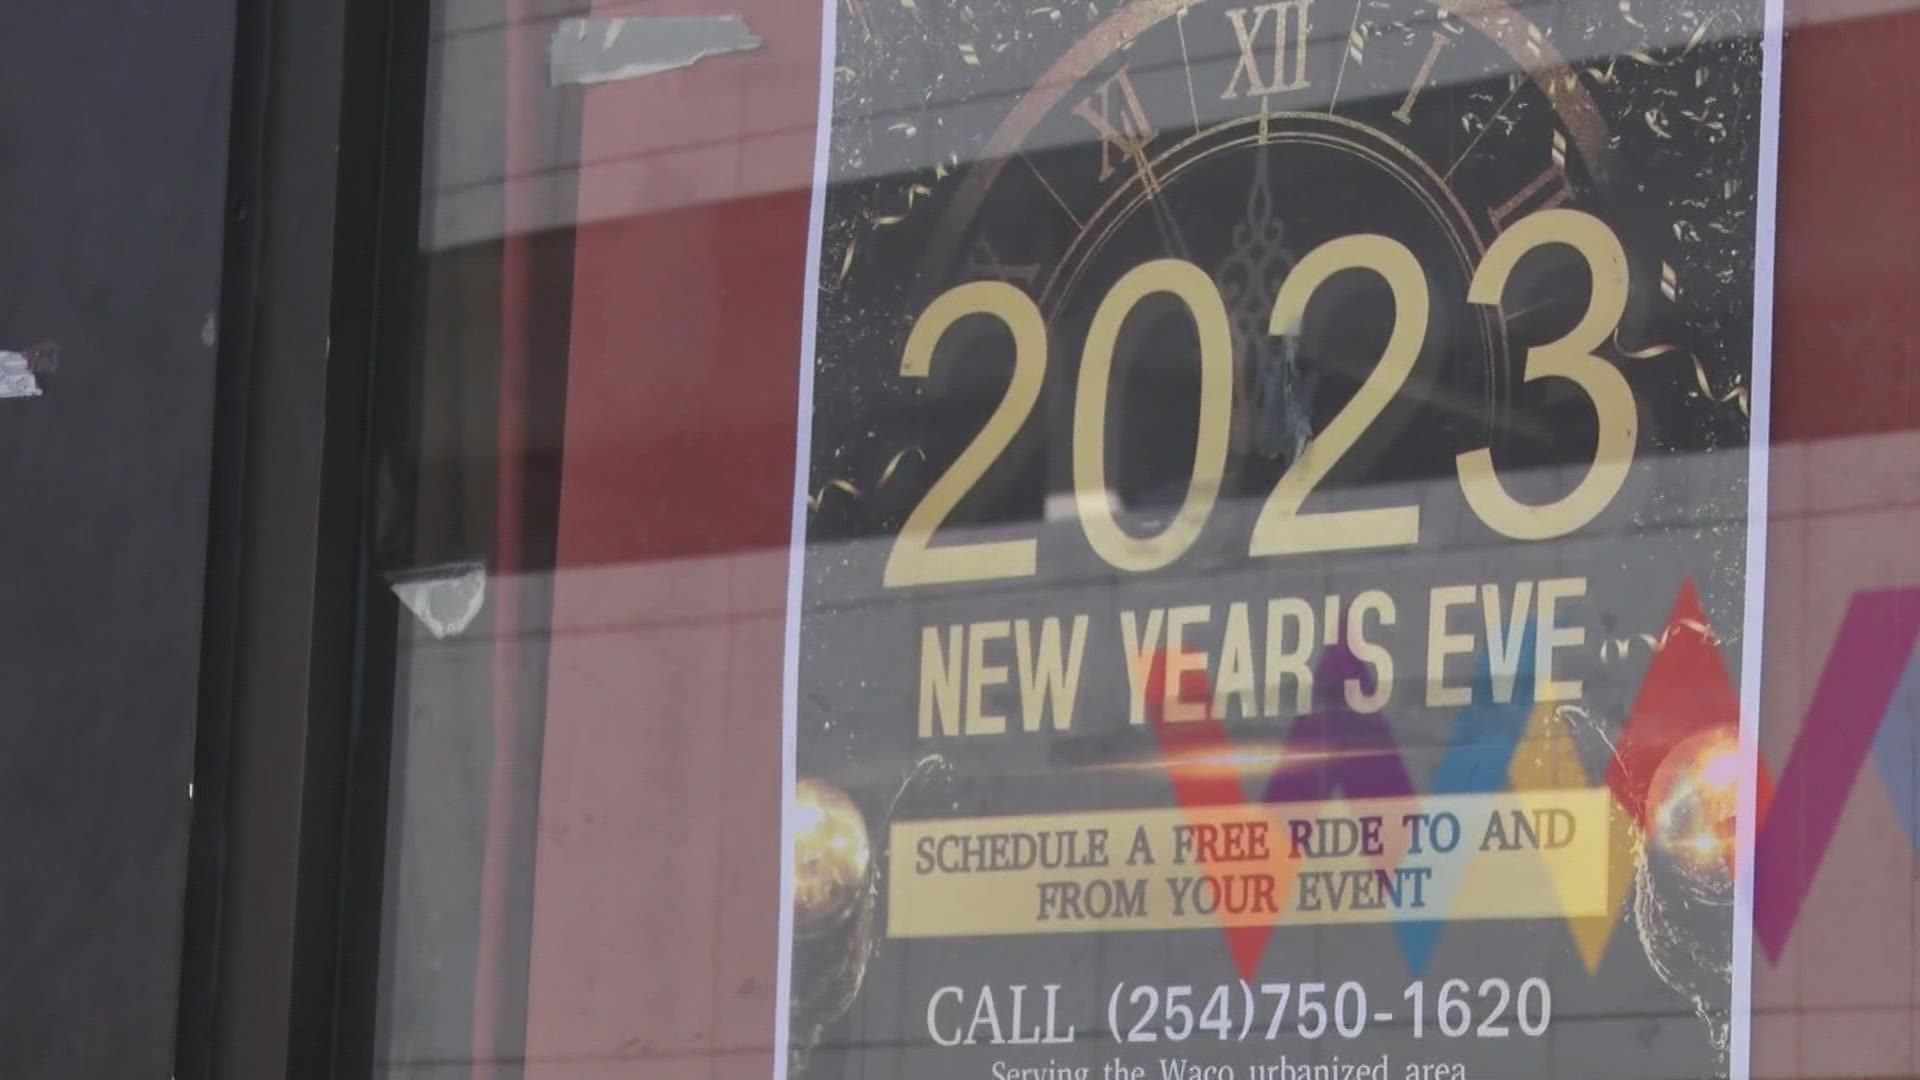 The countdown to 2023 is in full swing. New Year's Eve is a night of parties and packed bars. Drivers around the Waco area are taking simple steps to save lives.